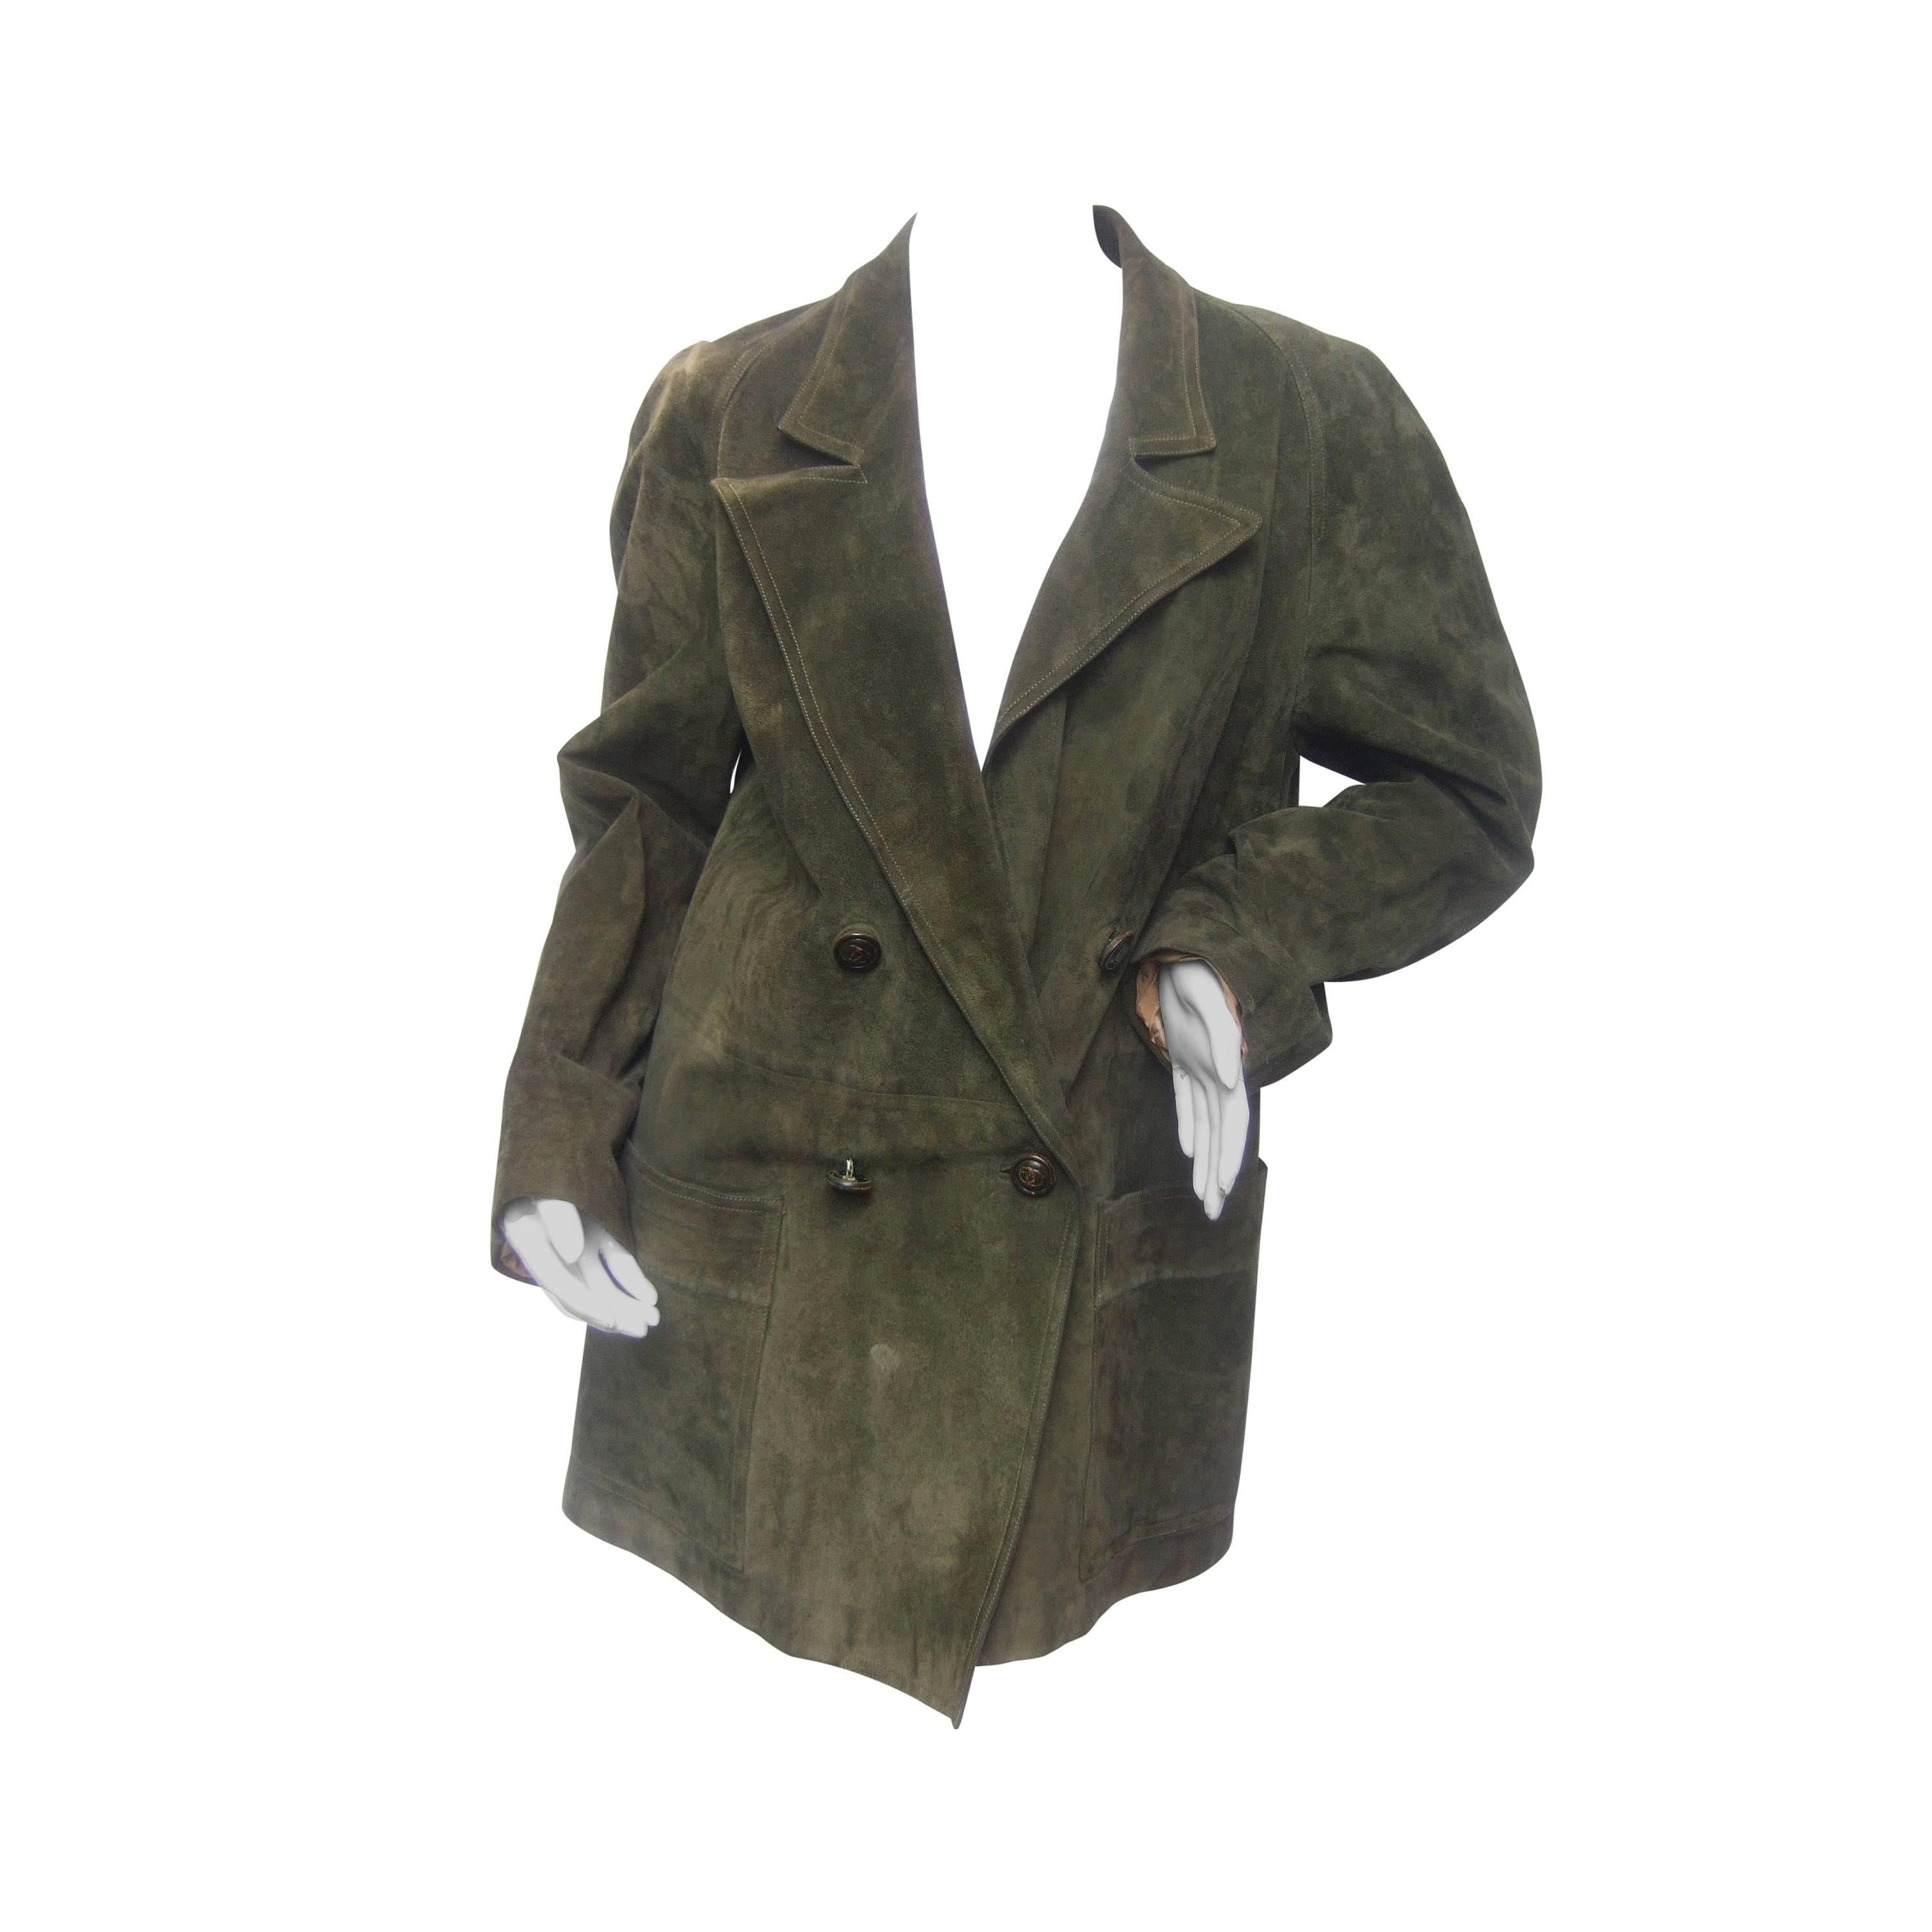 Gucci Italy Moss Green Suede Shabby Chic Unisex Jacket c 1970s